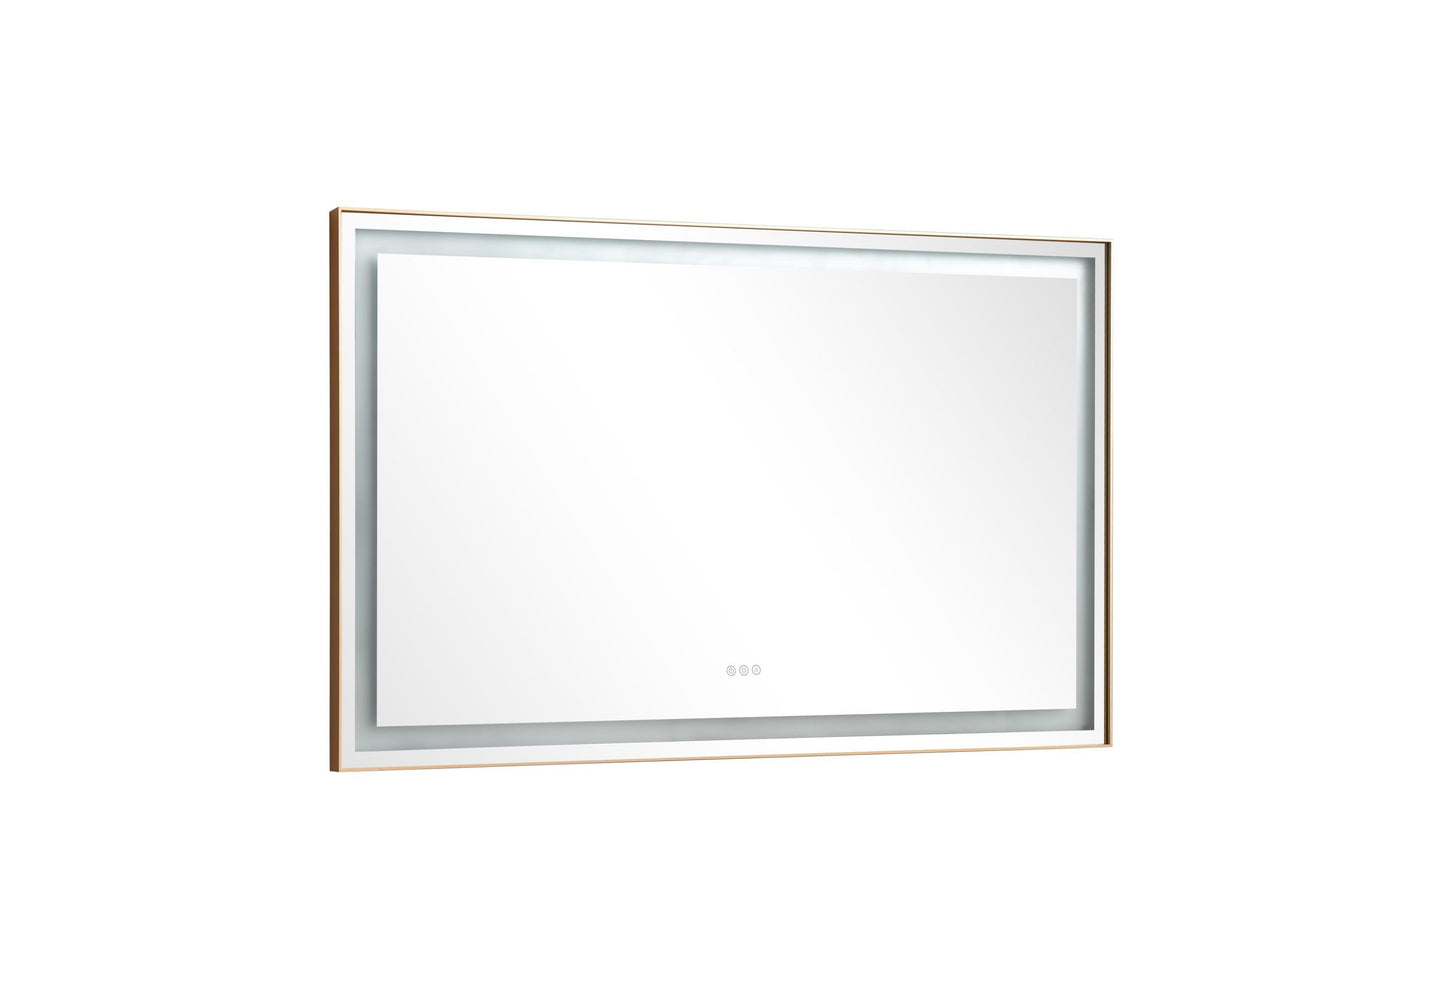 60*36 LED Lighted Bathroom Wall Mounted Mirror with High Lumen+Anti-Fog Separately Control